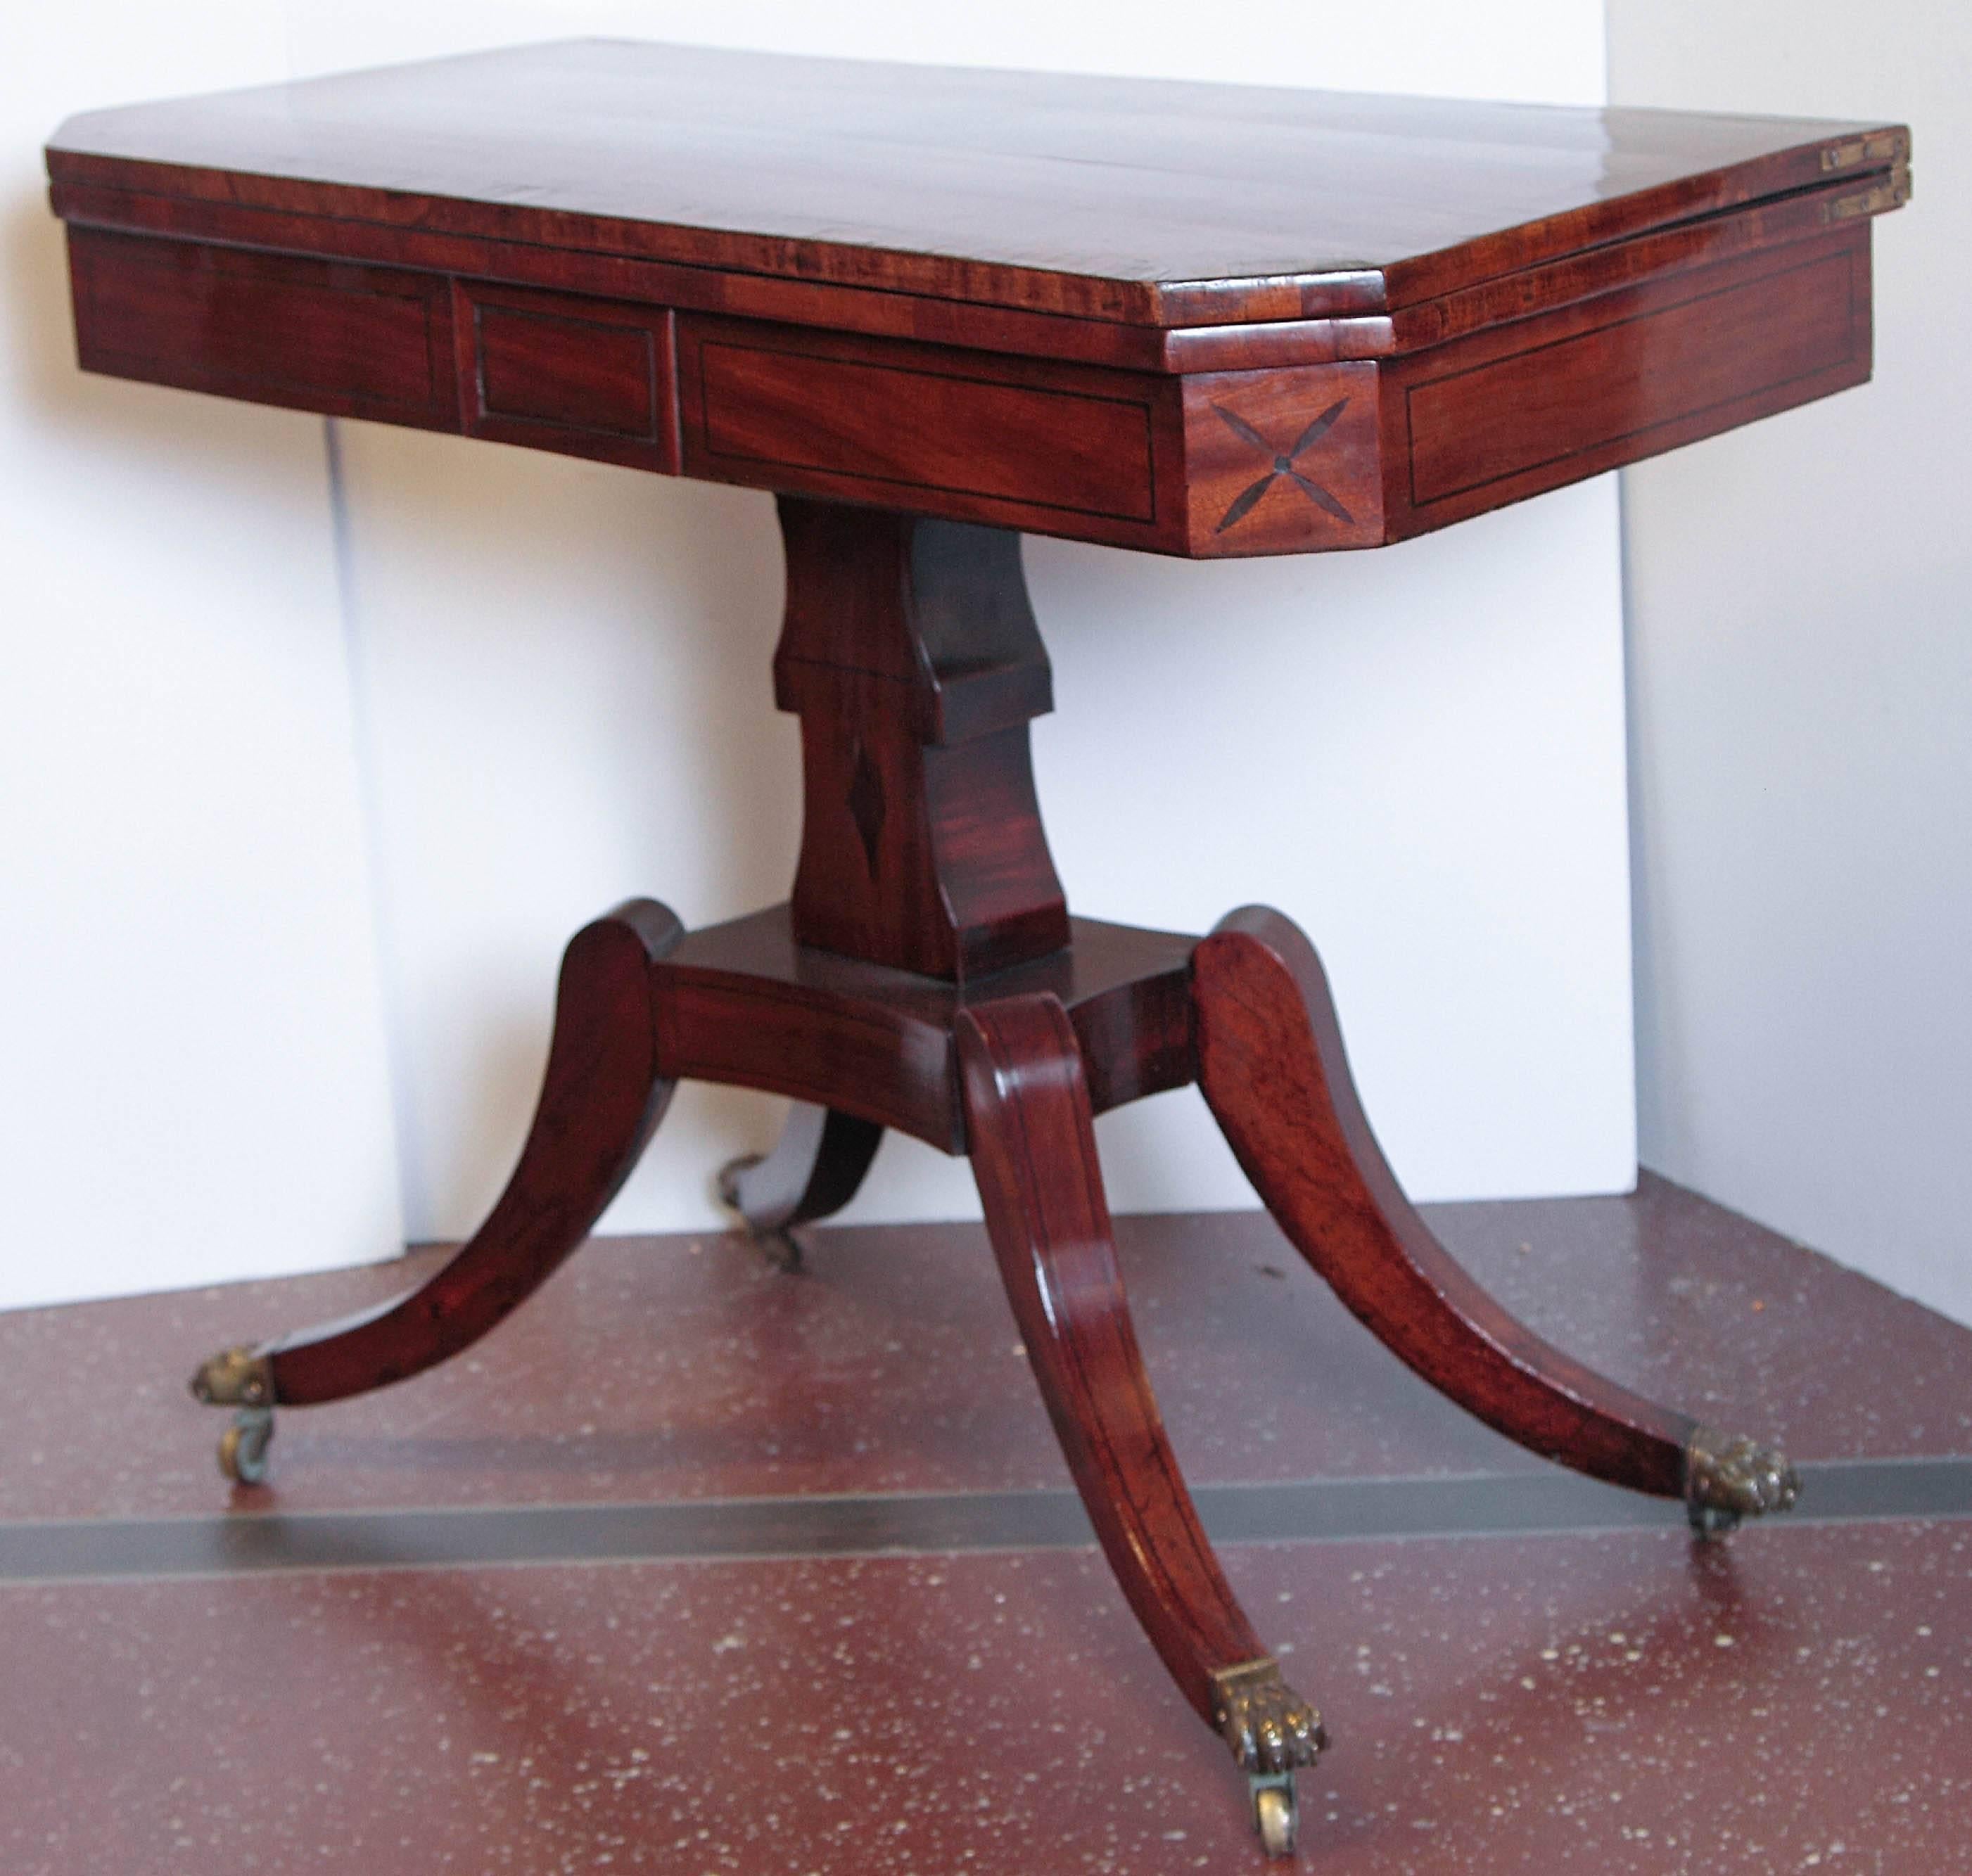 Period English Regency Mahogany Flip-Top Games Table In Excellent Condition For Sale In Dallas, TX